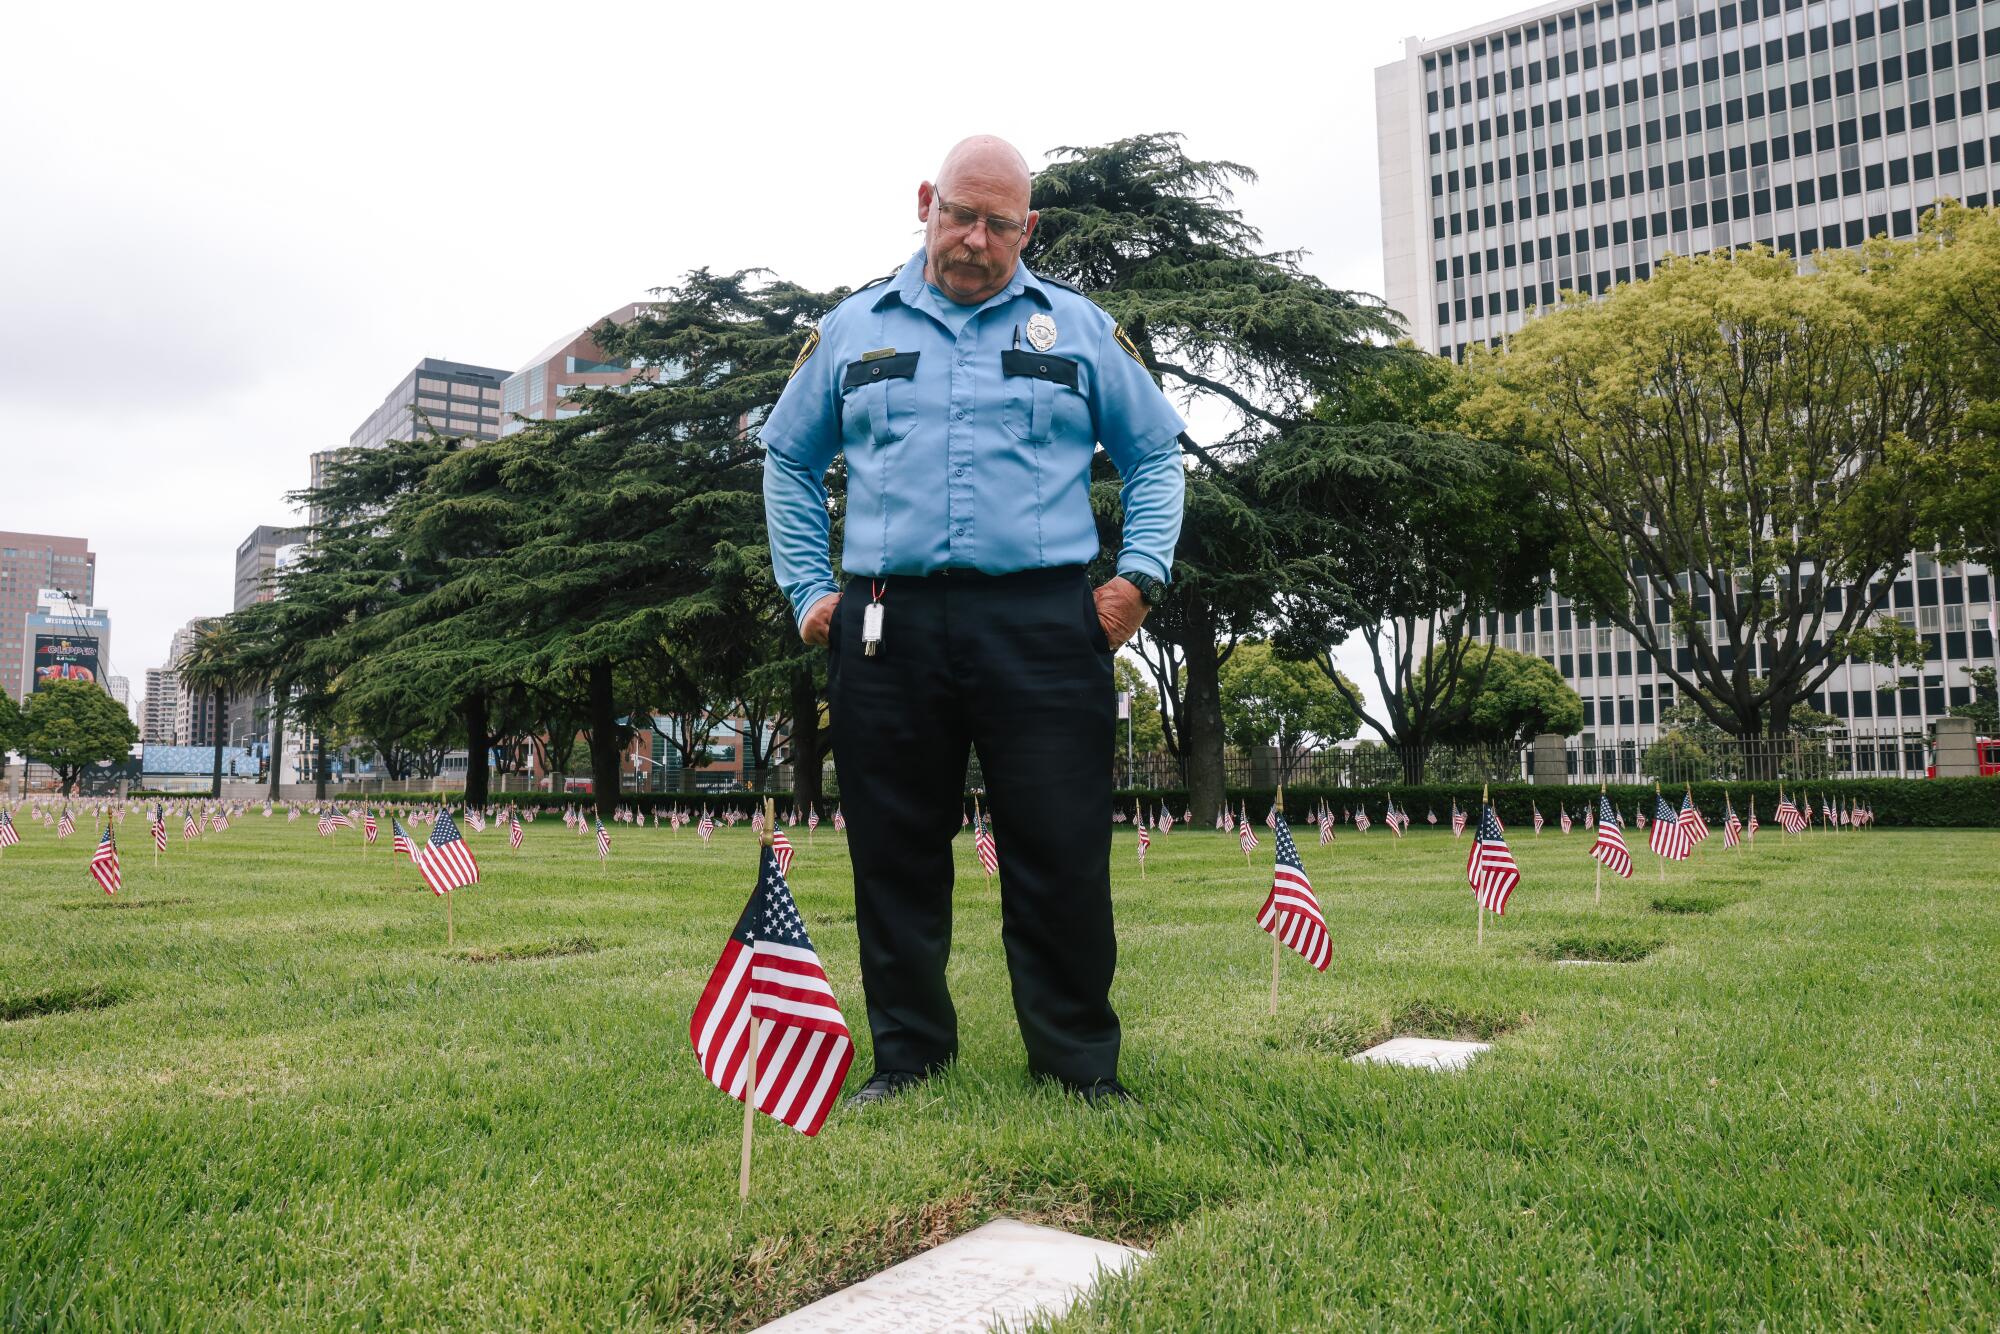 Scott Sargent, who works as security, looks down at the grave of a family member, Lewis L. Owens.